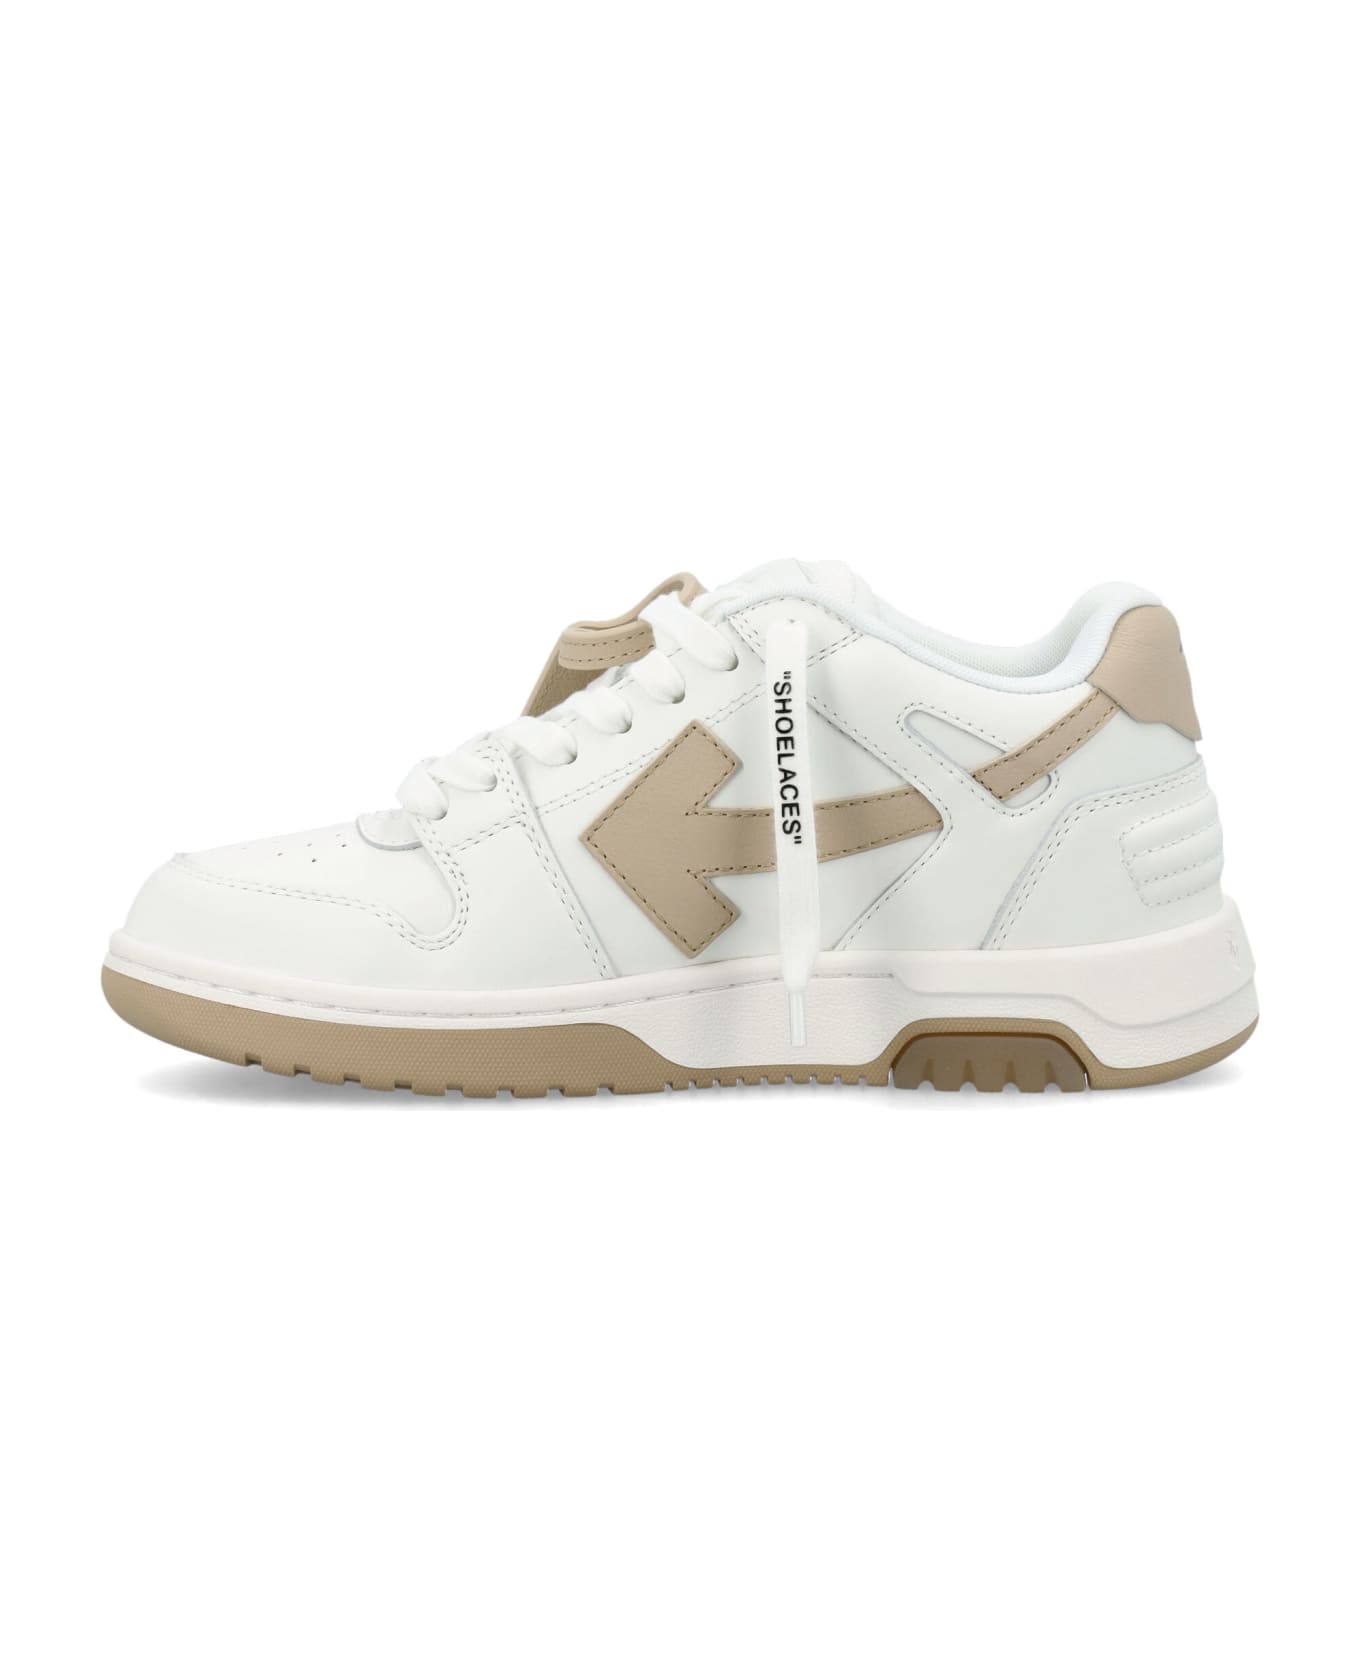 Off-White Out Of Office Woman's Sneakers - WHITE SEND